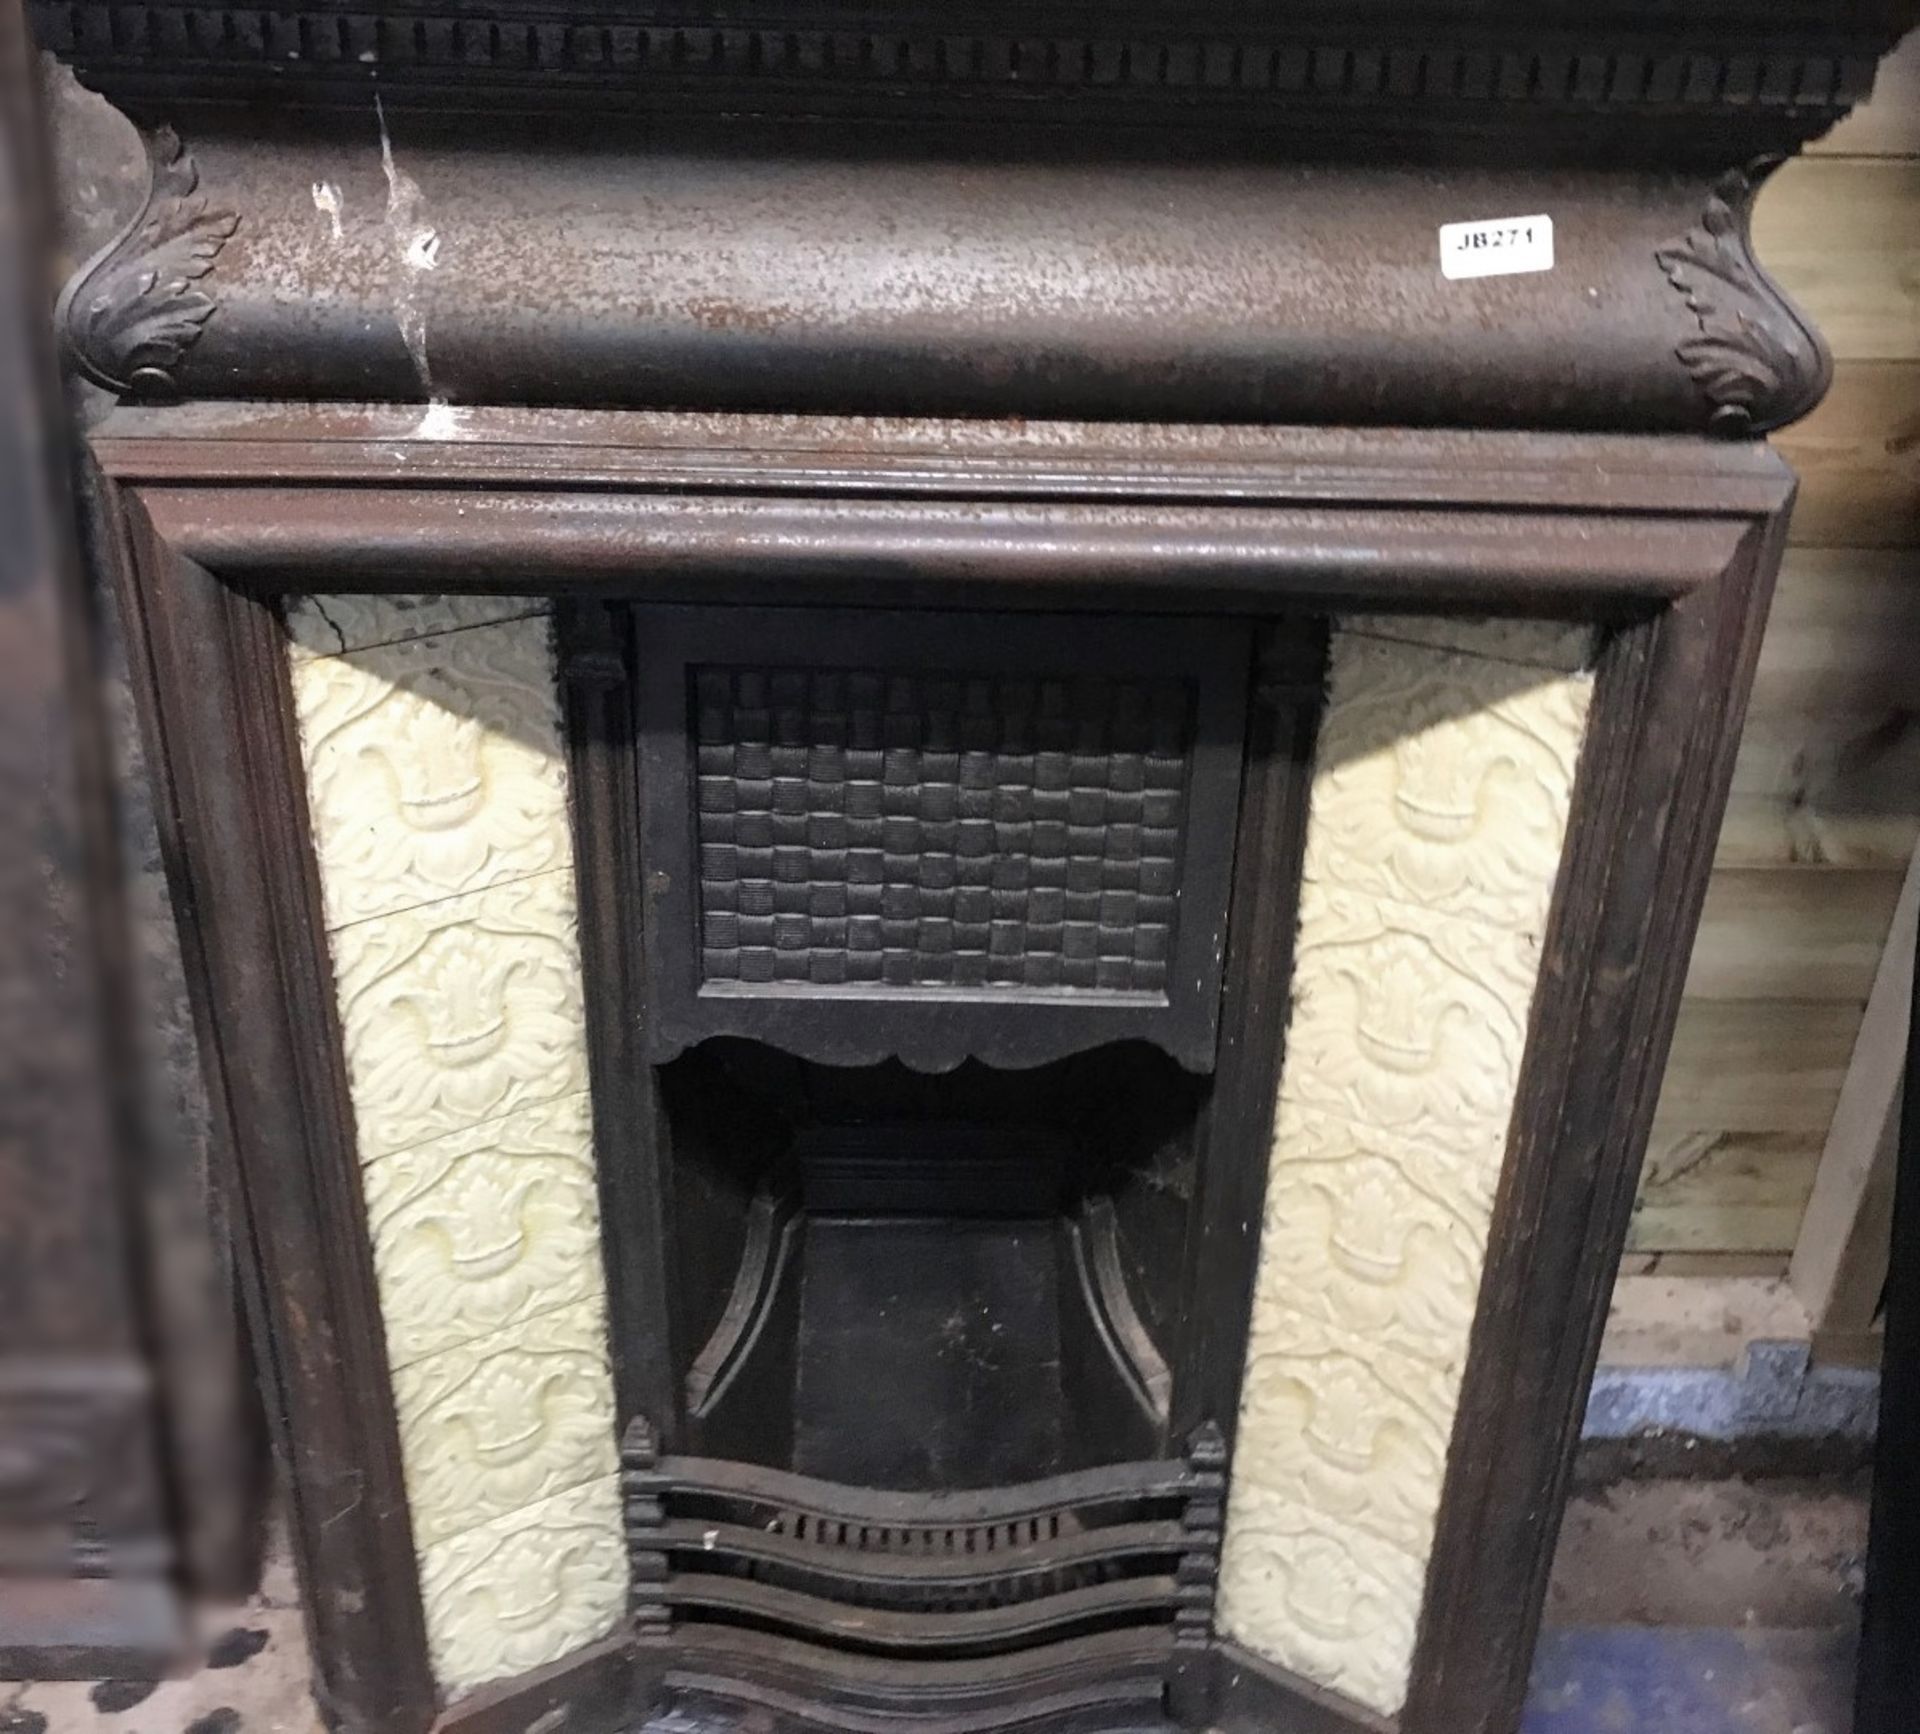 1 x Stunning Antique Victorian Cast Iron Fire Surround With Ornate Insert And Tiled Sides - - Image 2 of 8